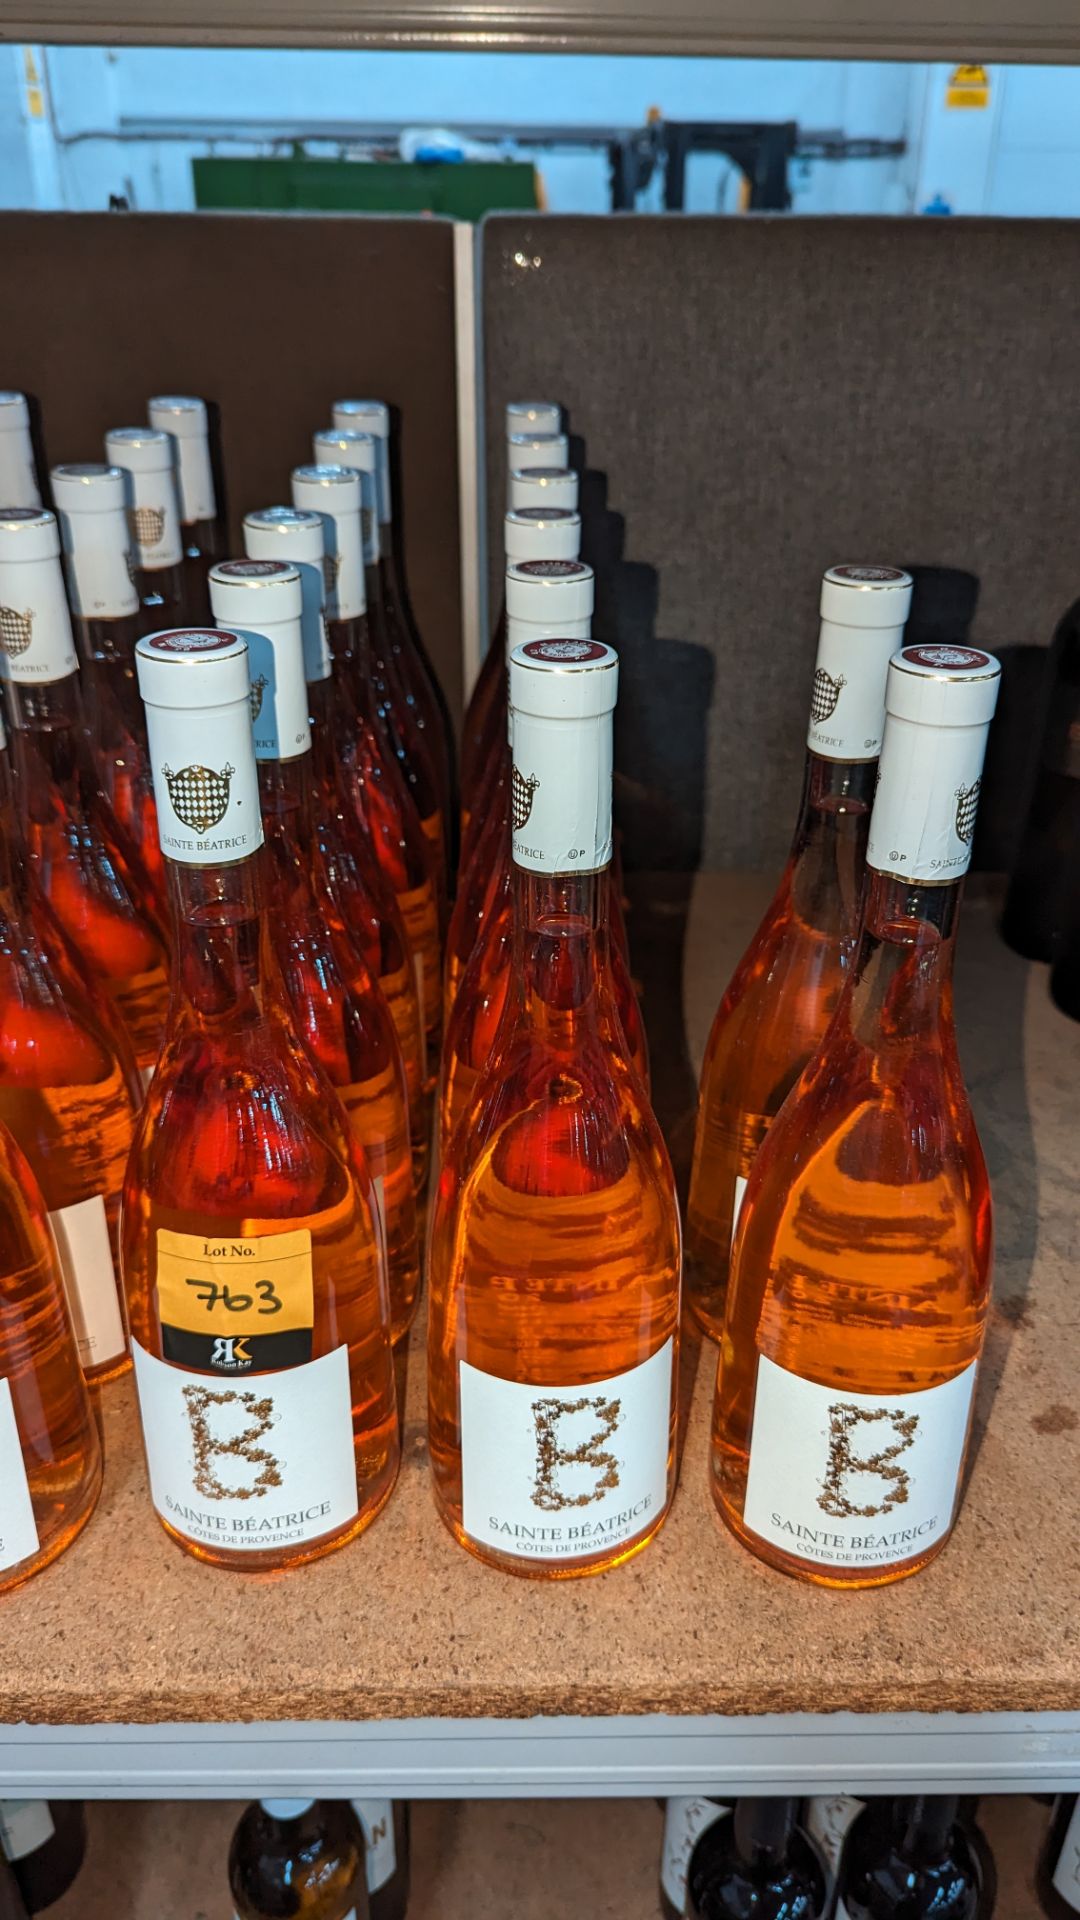 14 bottles of Sainte Béatrice Côtes de Provence 2020 rosé French wine sold under AWRS number XQAW000